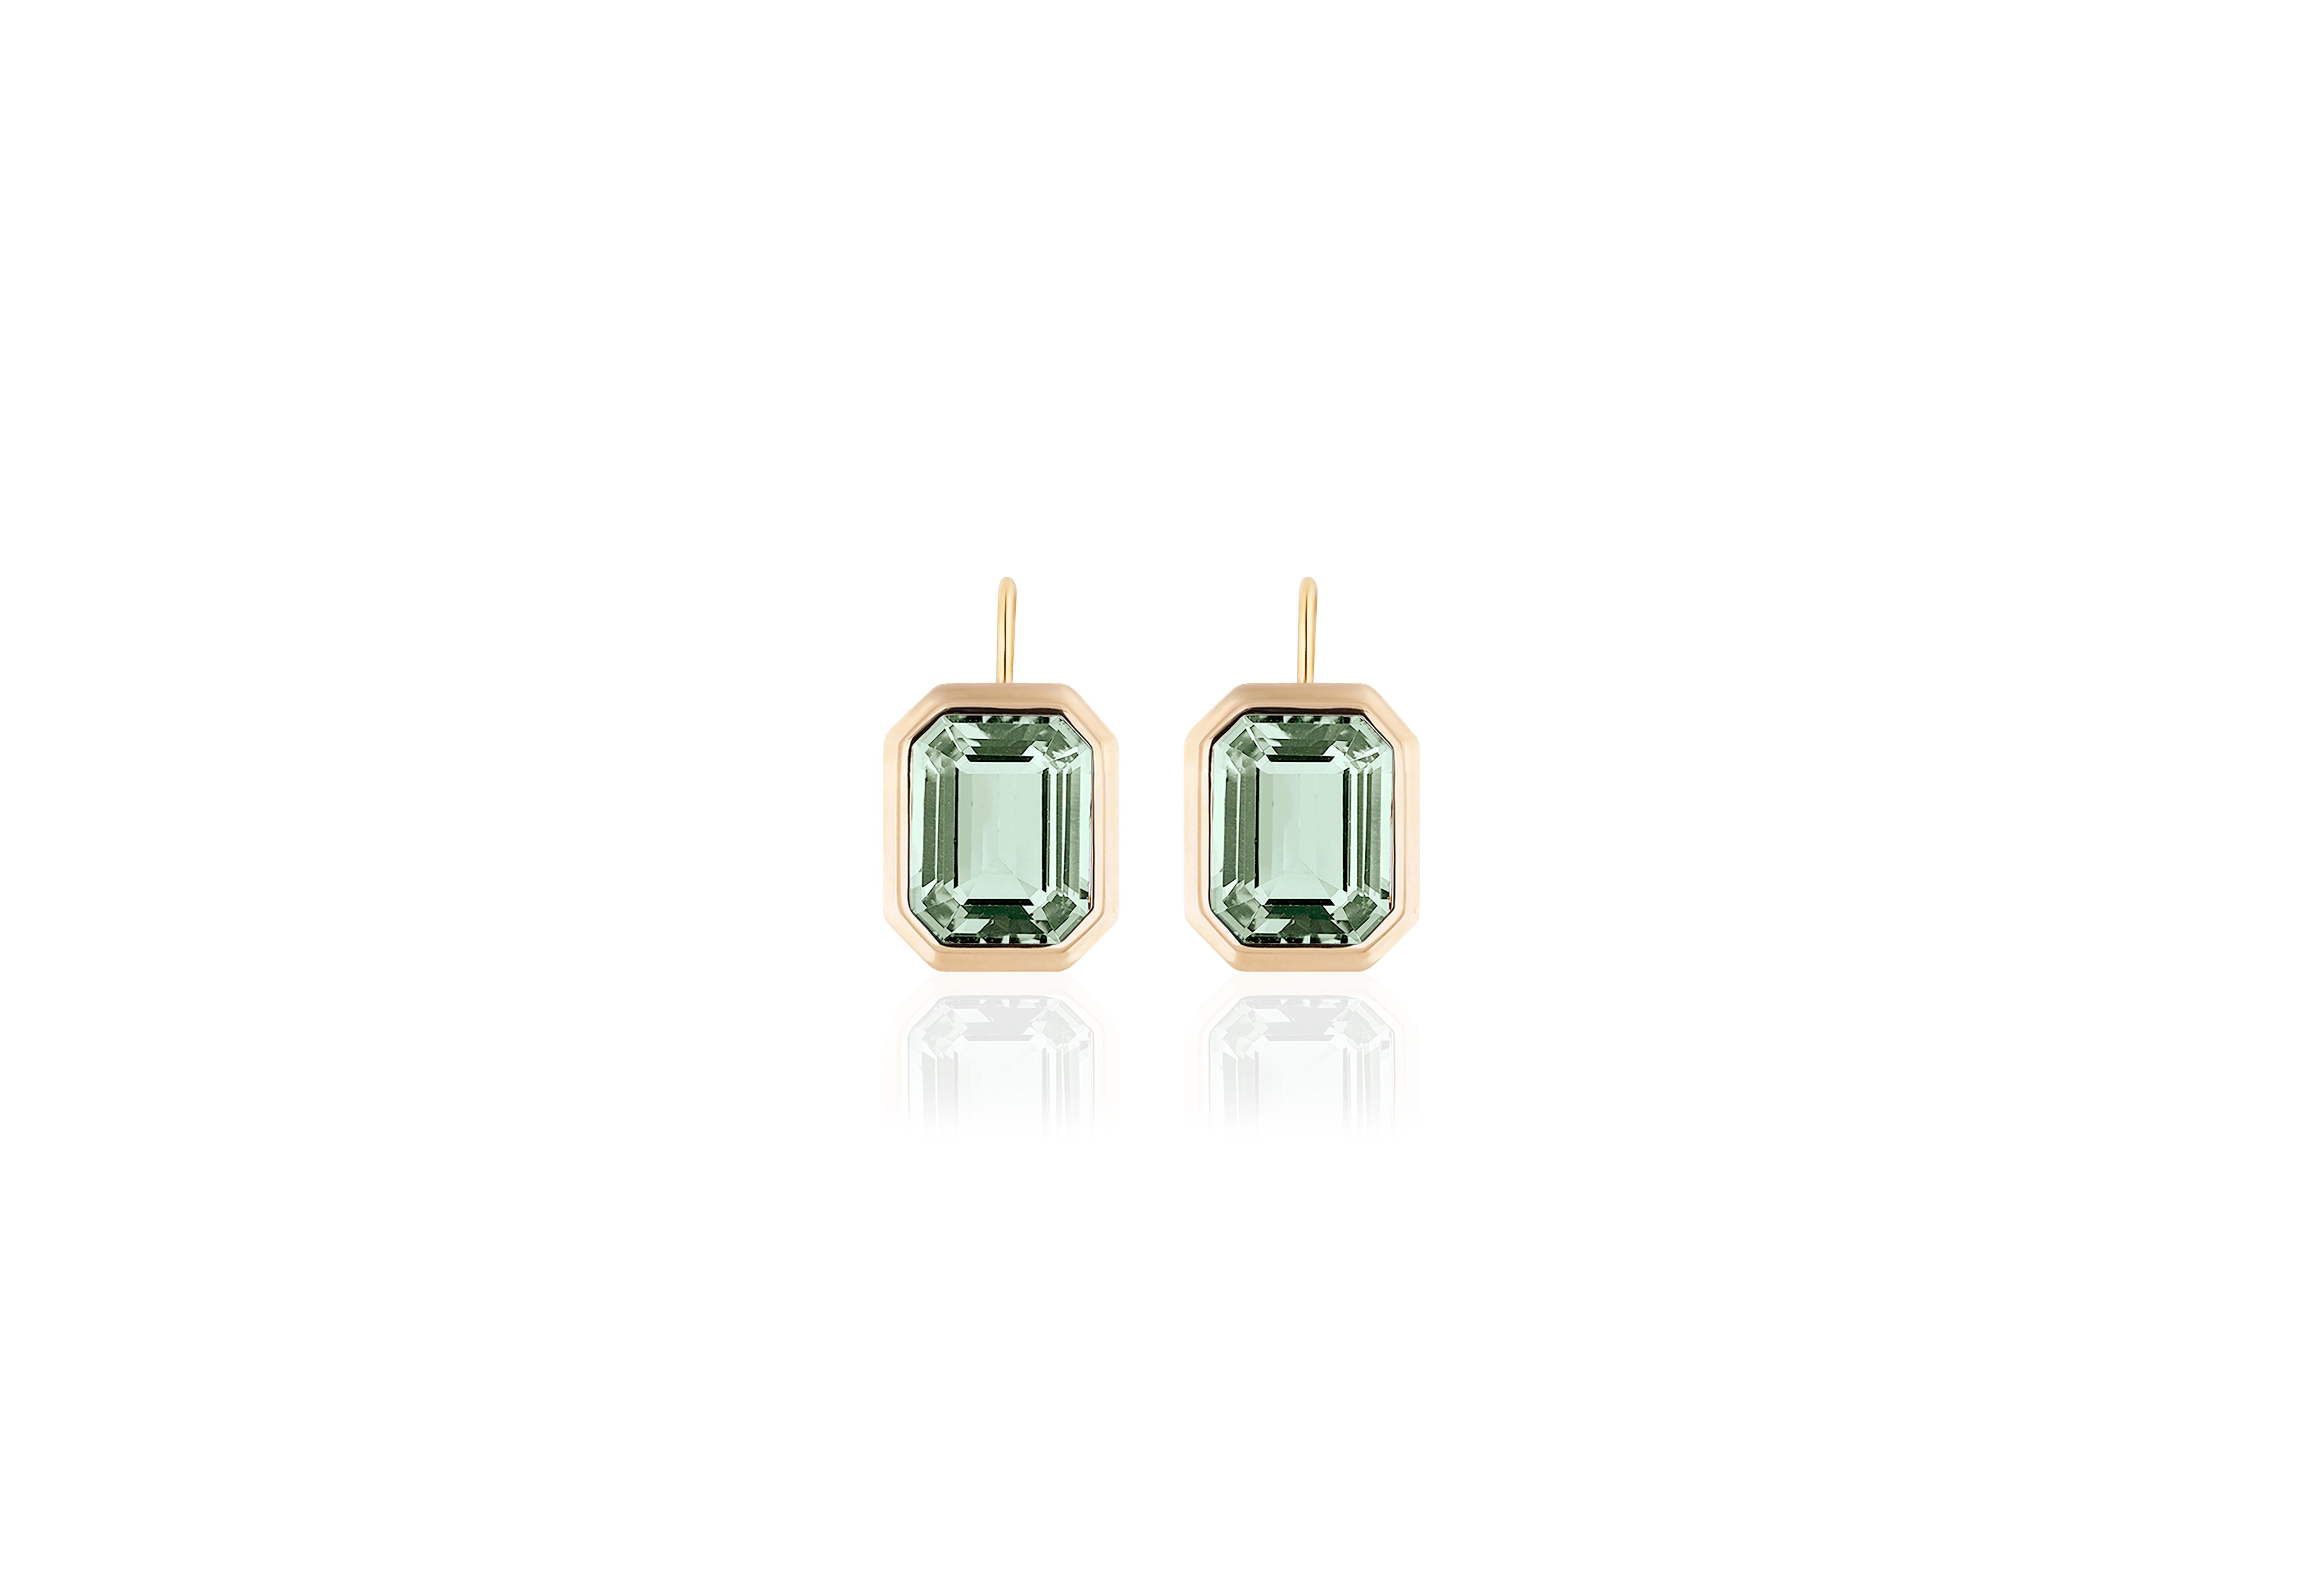 These Prasiolite Emerald Cut Bezel Set Earrings on Wire in 18K Yellow Gold from the 'Manhattan Collection are a stunning and sophisticated jewelry piece. These earrings feature exquisite Prasiolite gemstones with an elegant emerald cut, cradled in a